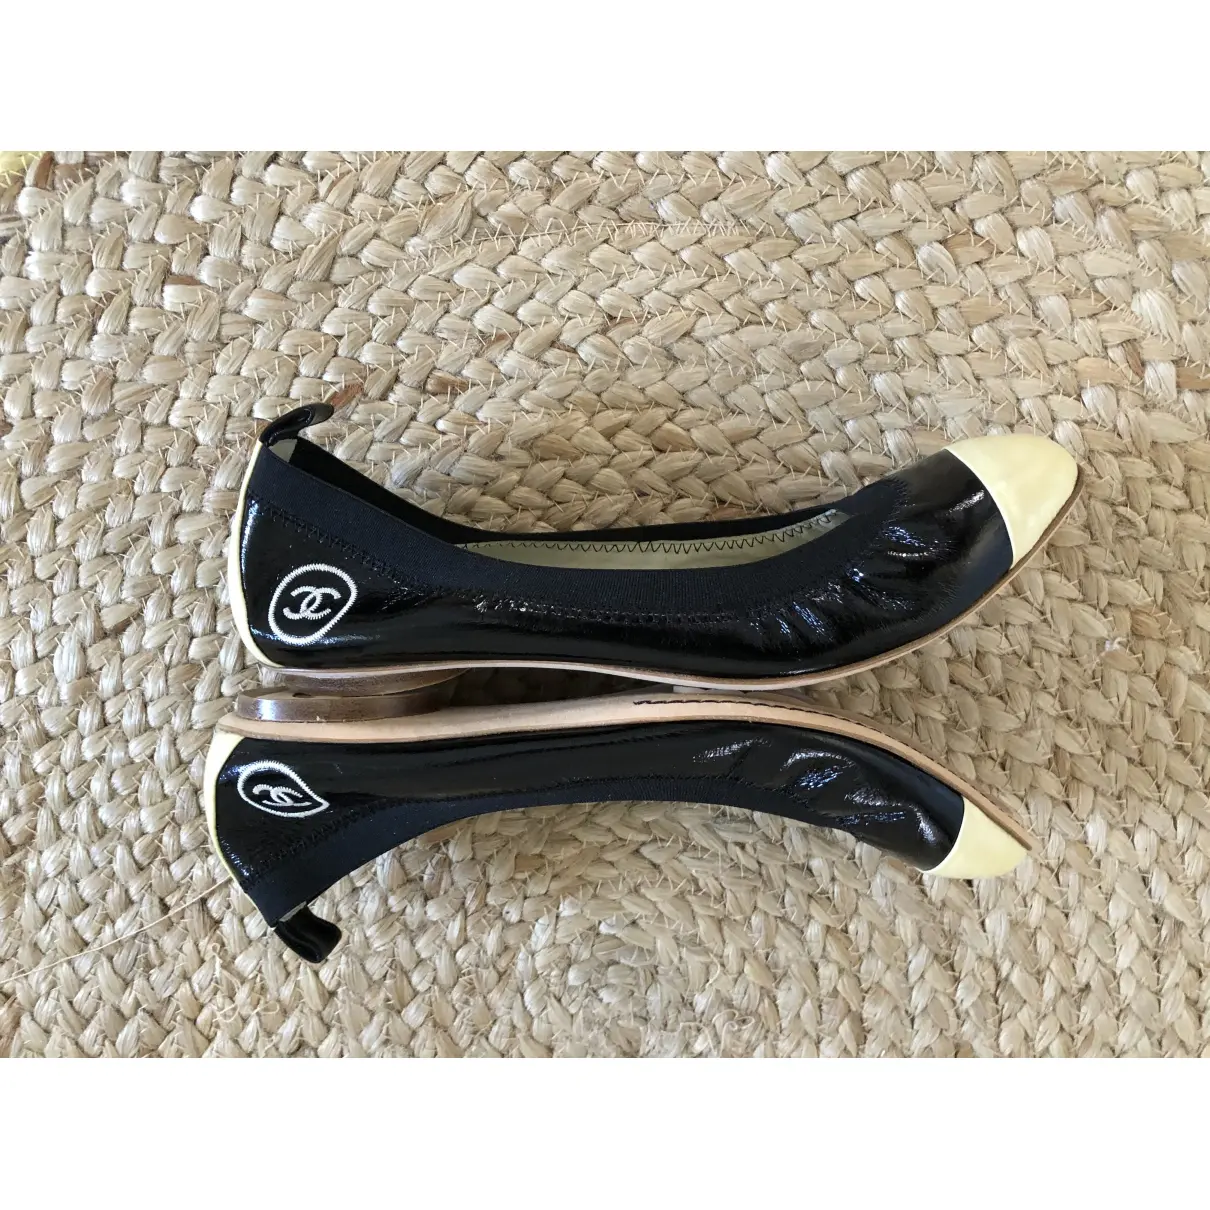 Buy Chanel Patent leather ballet flats online